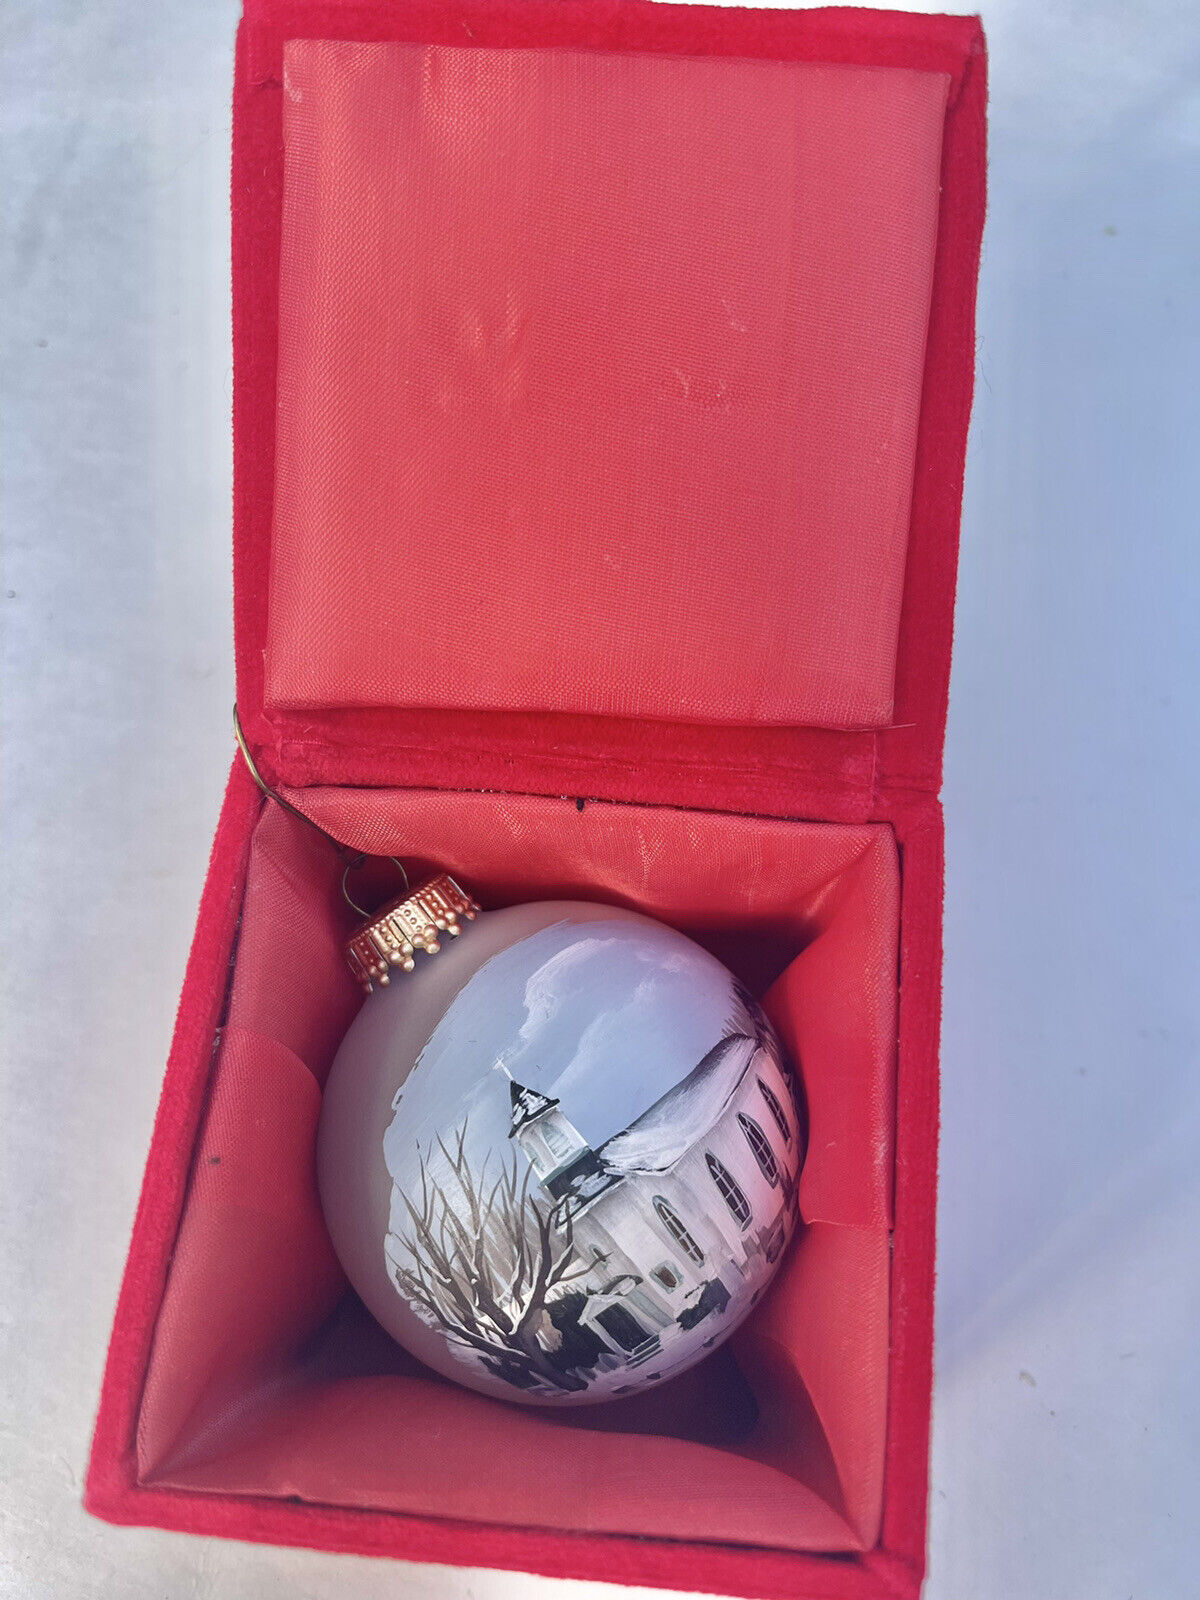 VINTAGE 1999 HAND PAINTED KINSLEY R WYALUSING  JULY 17 1999 ORNAMENT